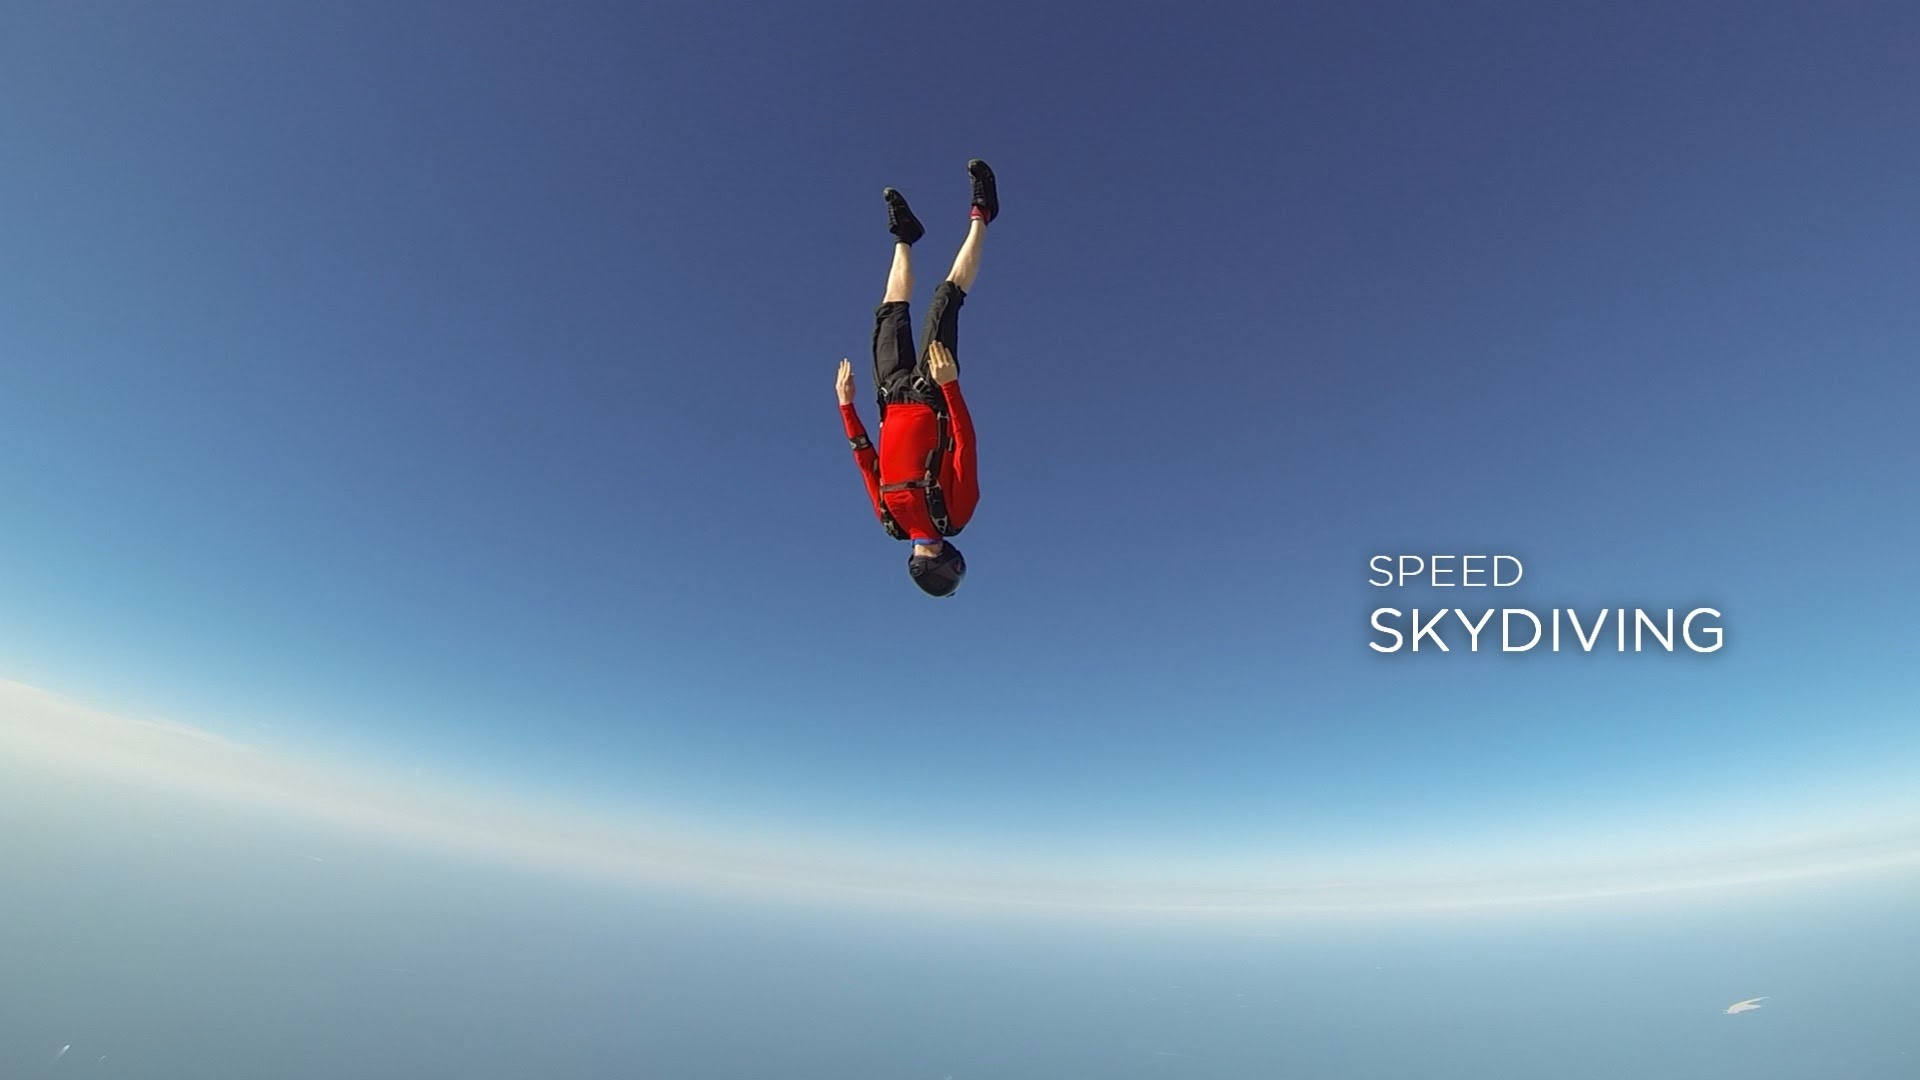 DIPC 4 DAY 7: SPEED SKYDIVING - YouTube